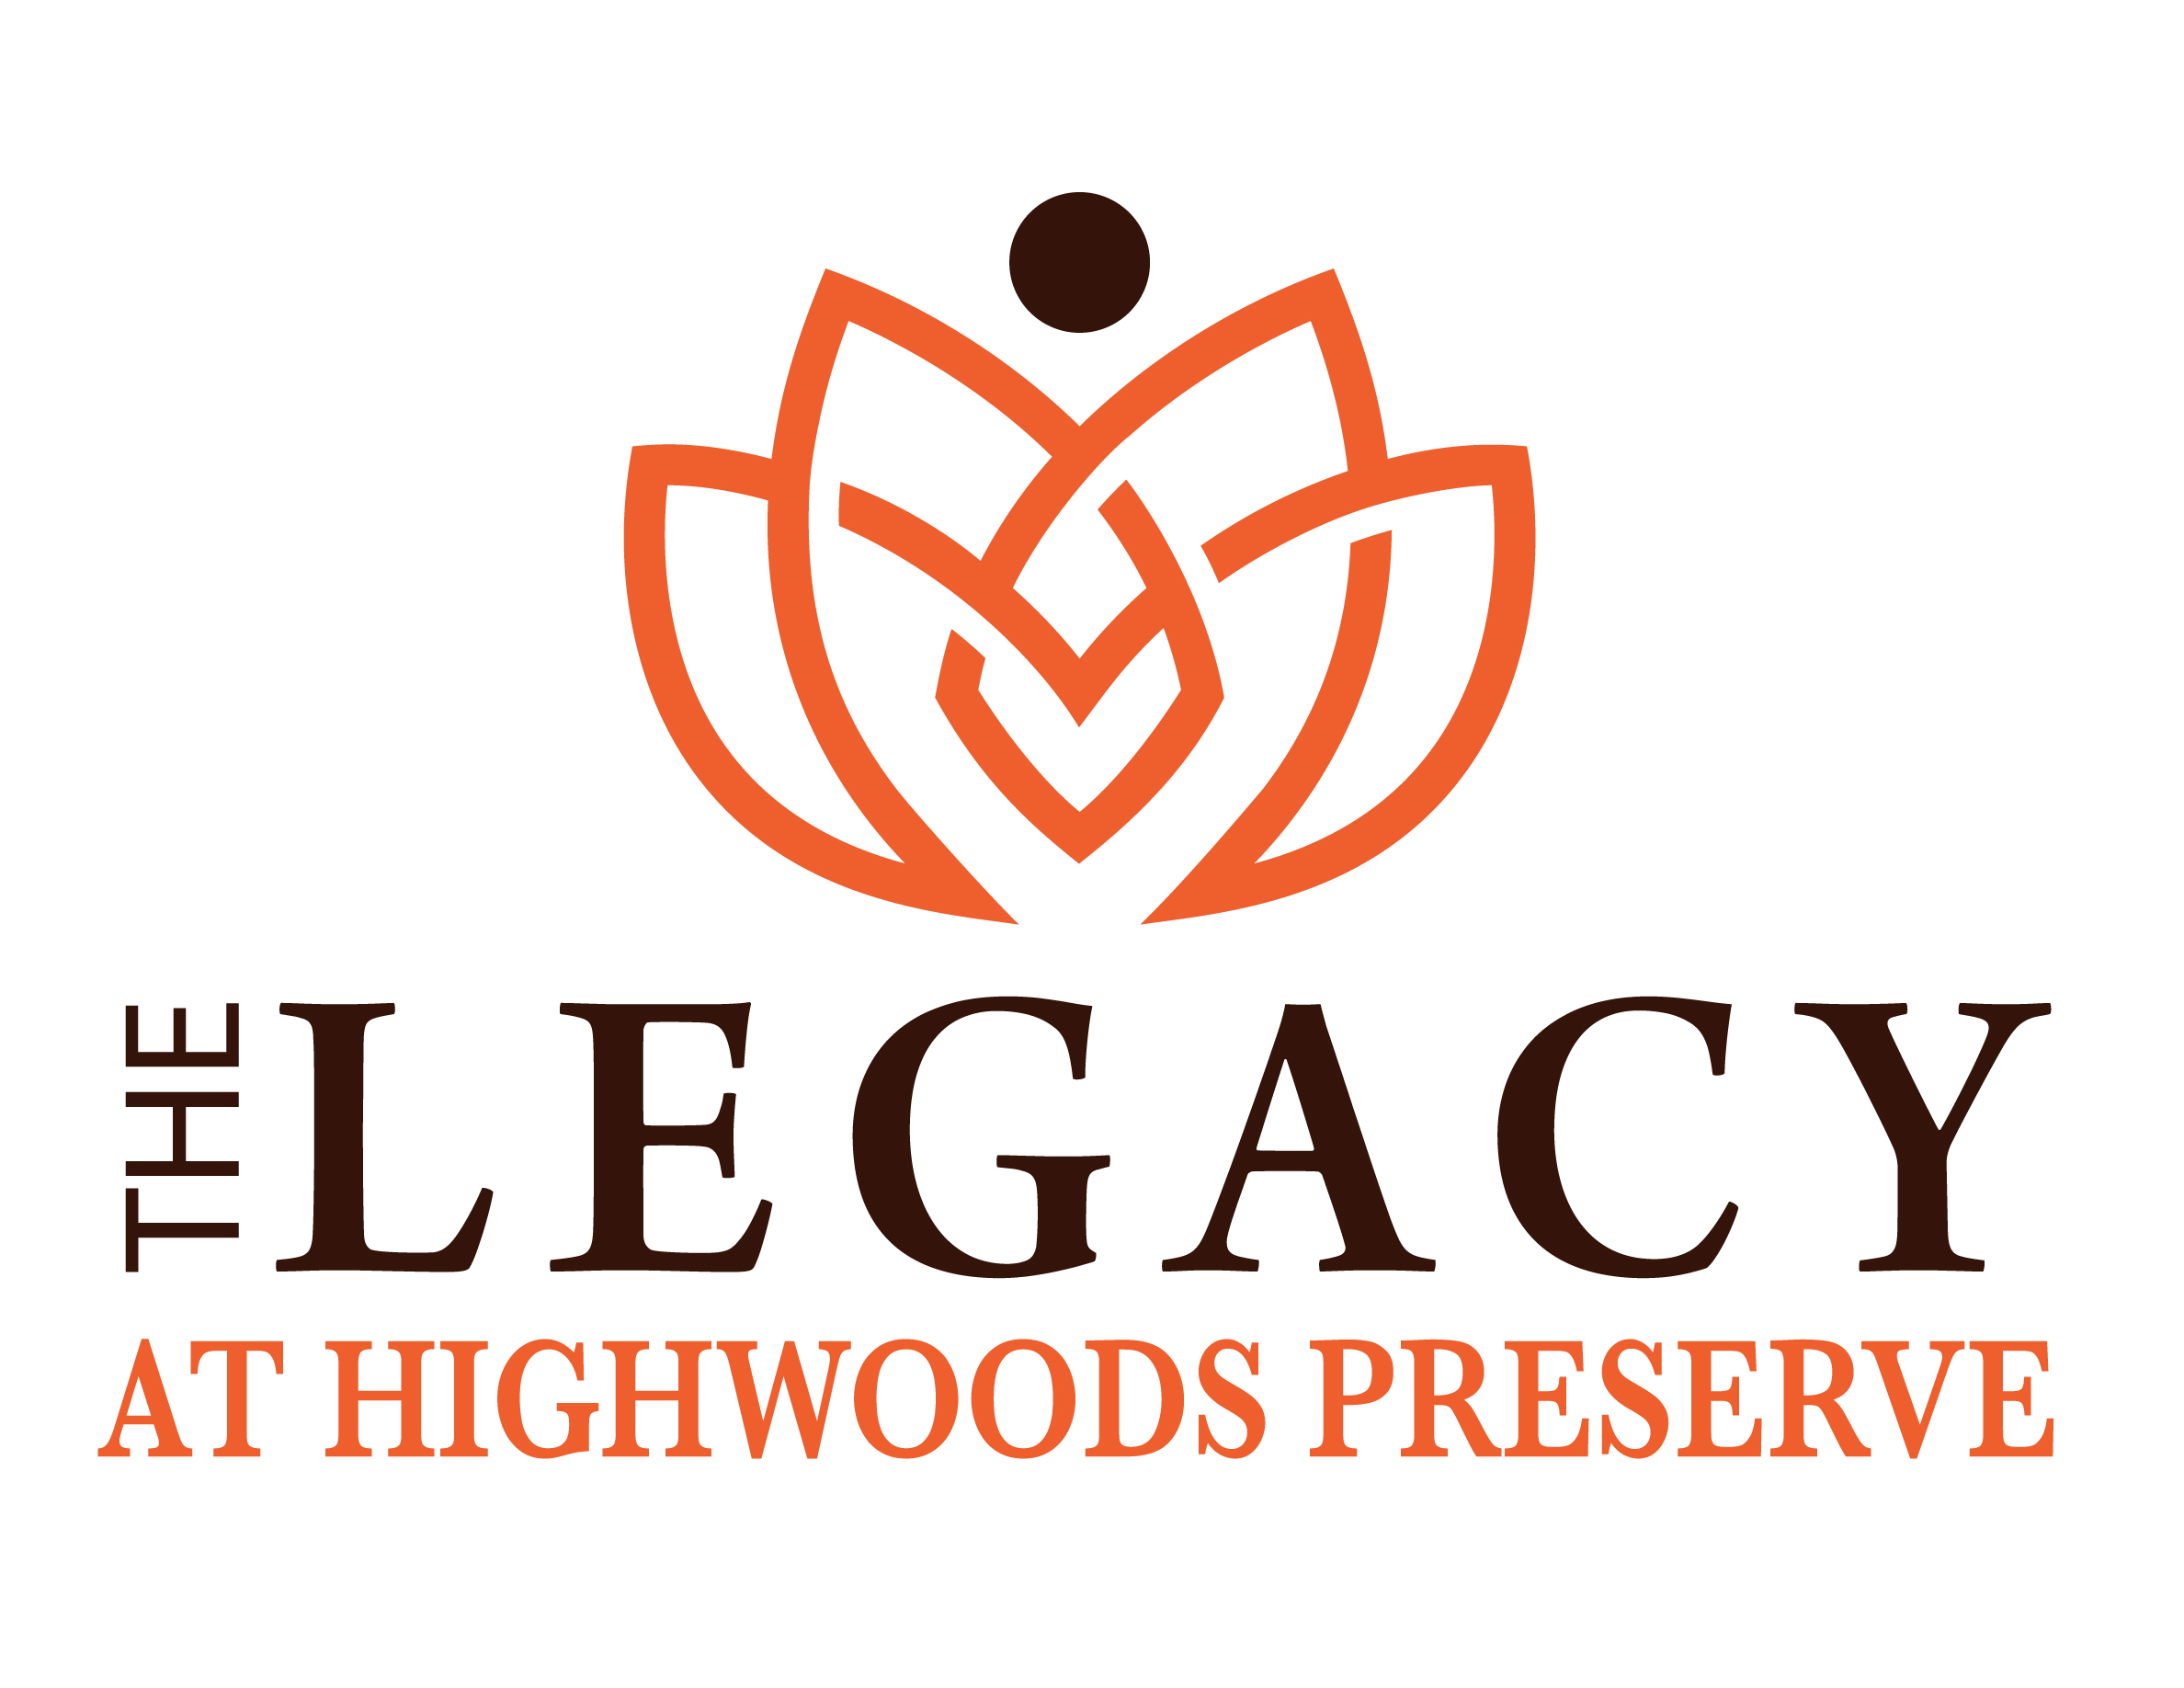 f. Legacy at Highwoods Preserve (Supporting Hydration Station)